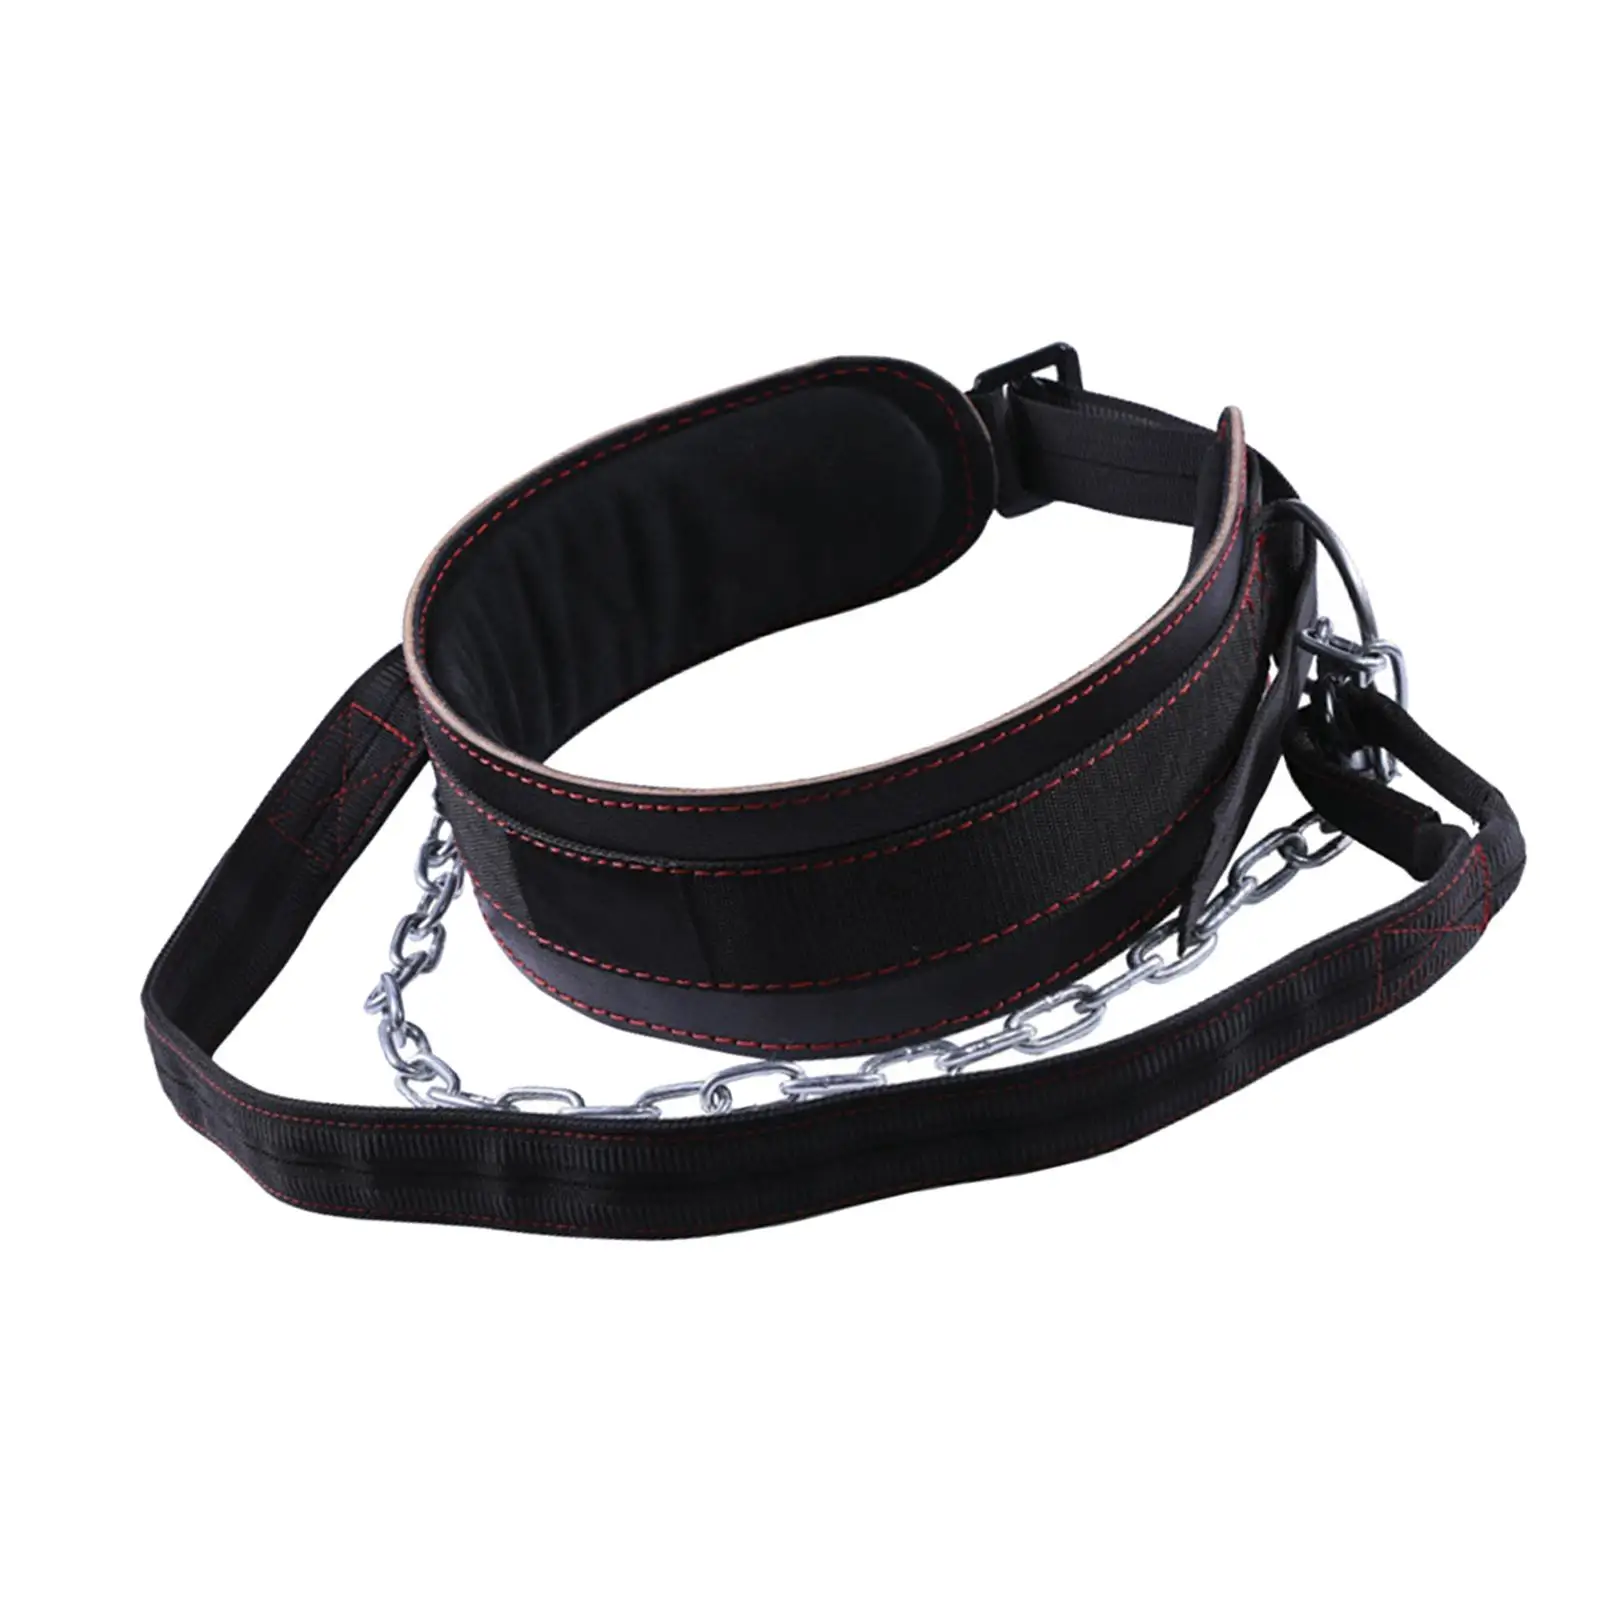 Pull Ups Belt with Chain Spandex Body Building Trainer Weight Belt for Training Powerlifting